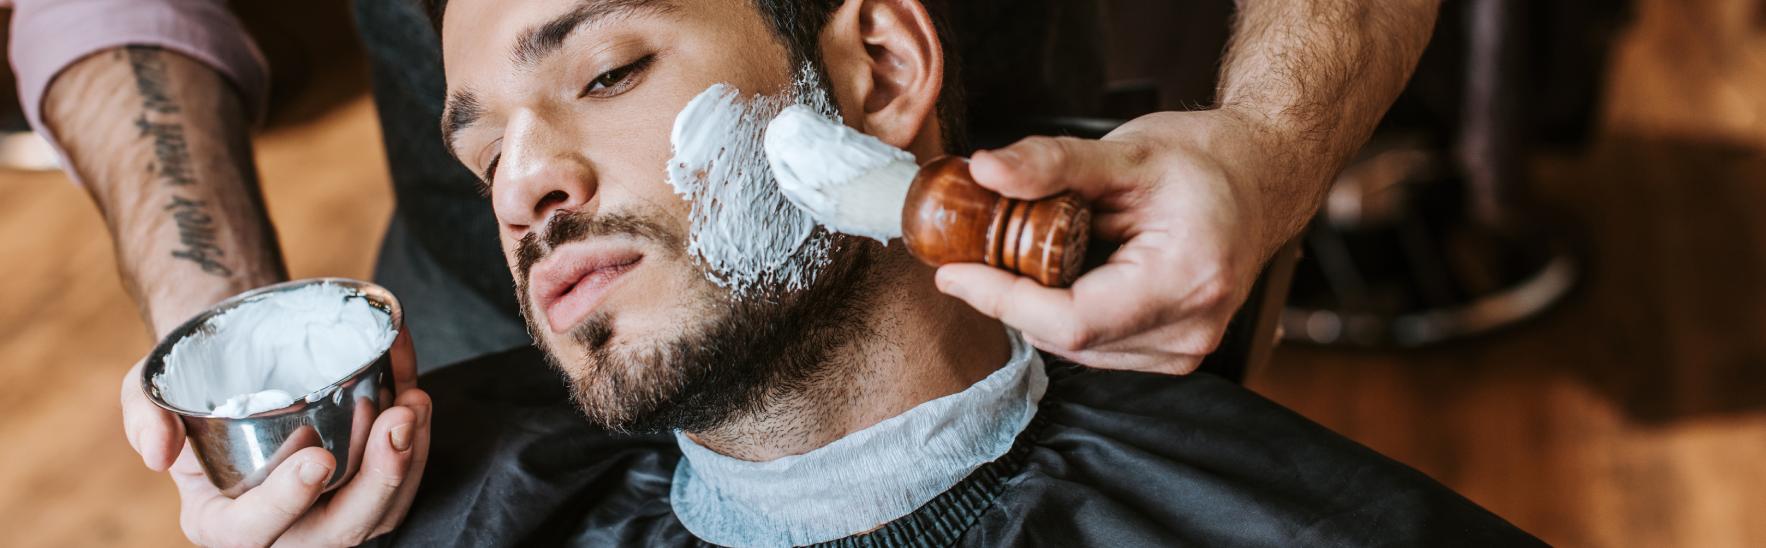 Our Top Grooming Tips